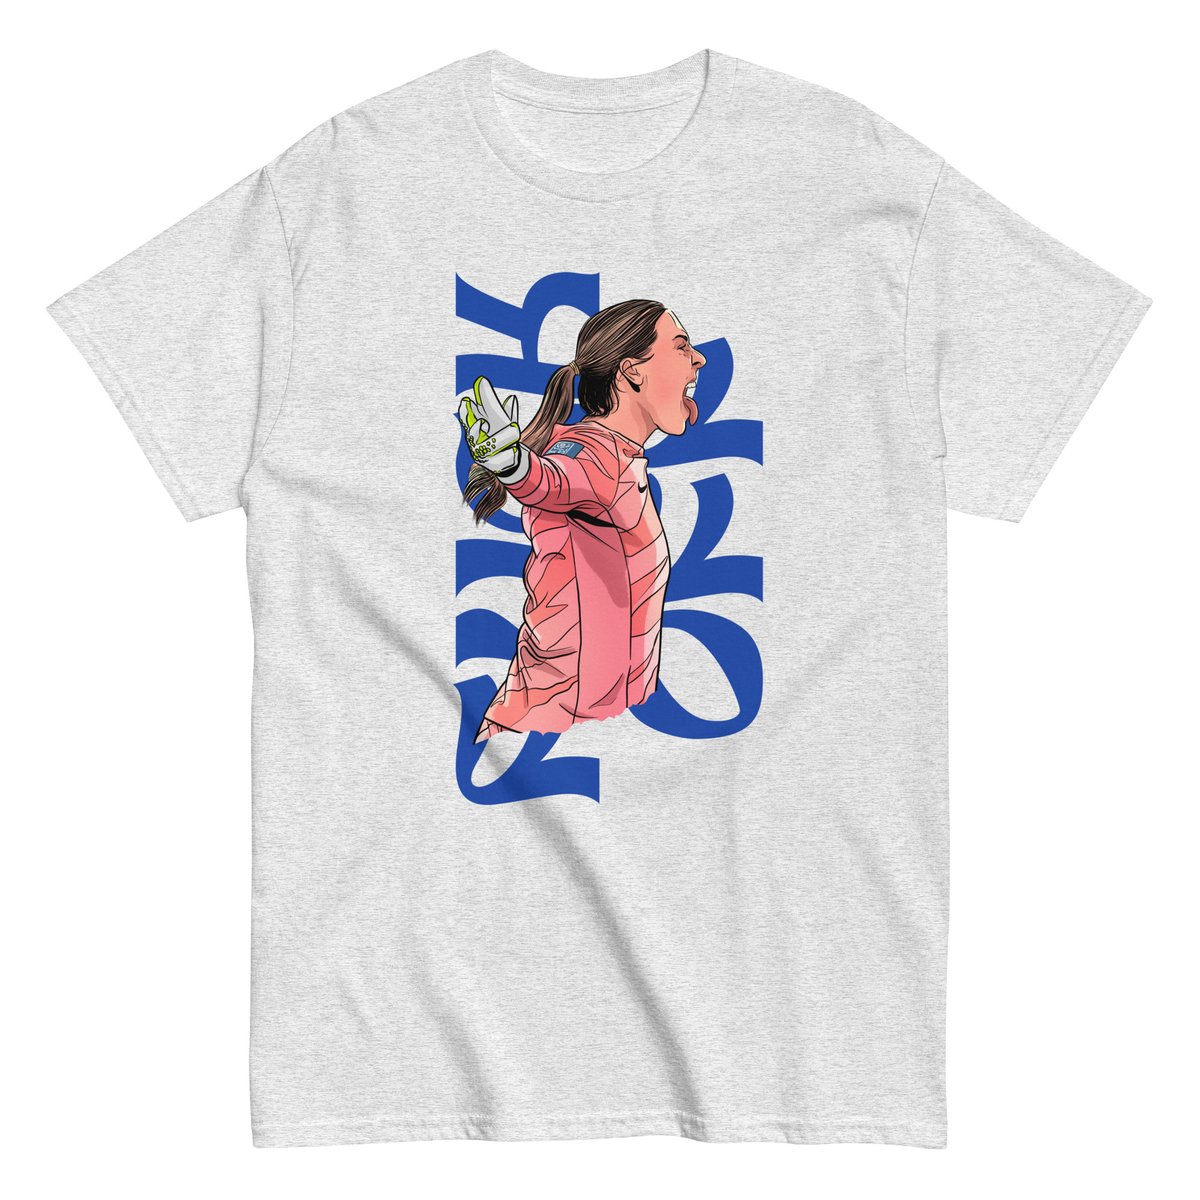 'Mary Queen of Earps' t-shirt now available in the shop...

25% off with code AUGUST at the checkout...

Since Nike haven't made the shirt available to buy, buy this instead...

#MaryEarps #ENG #WomensWorldCup2023